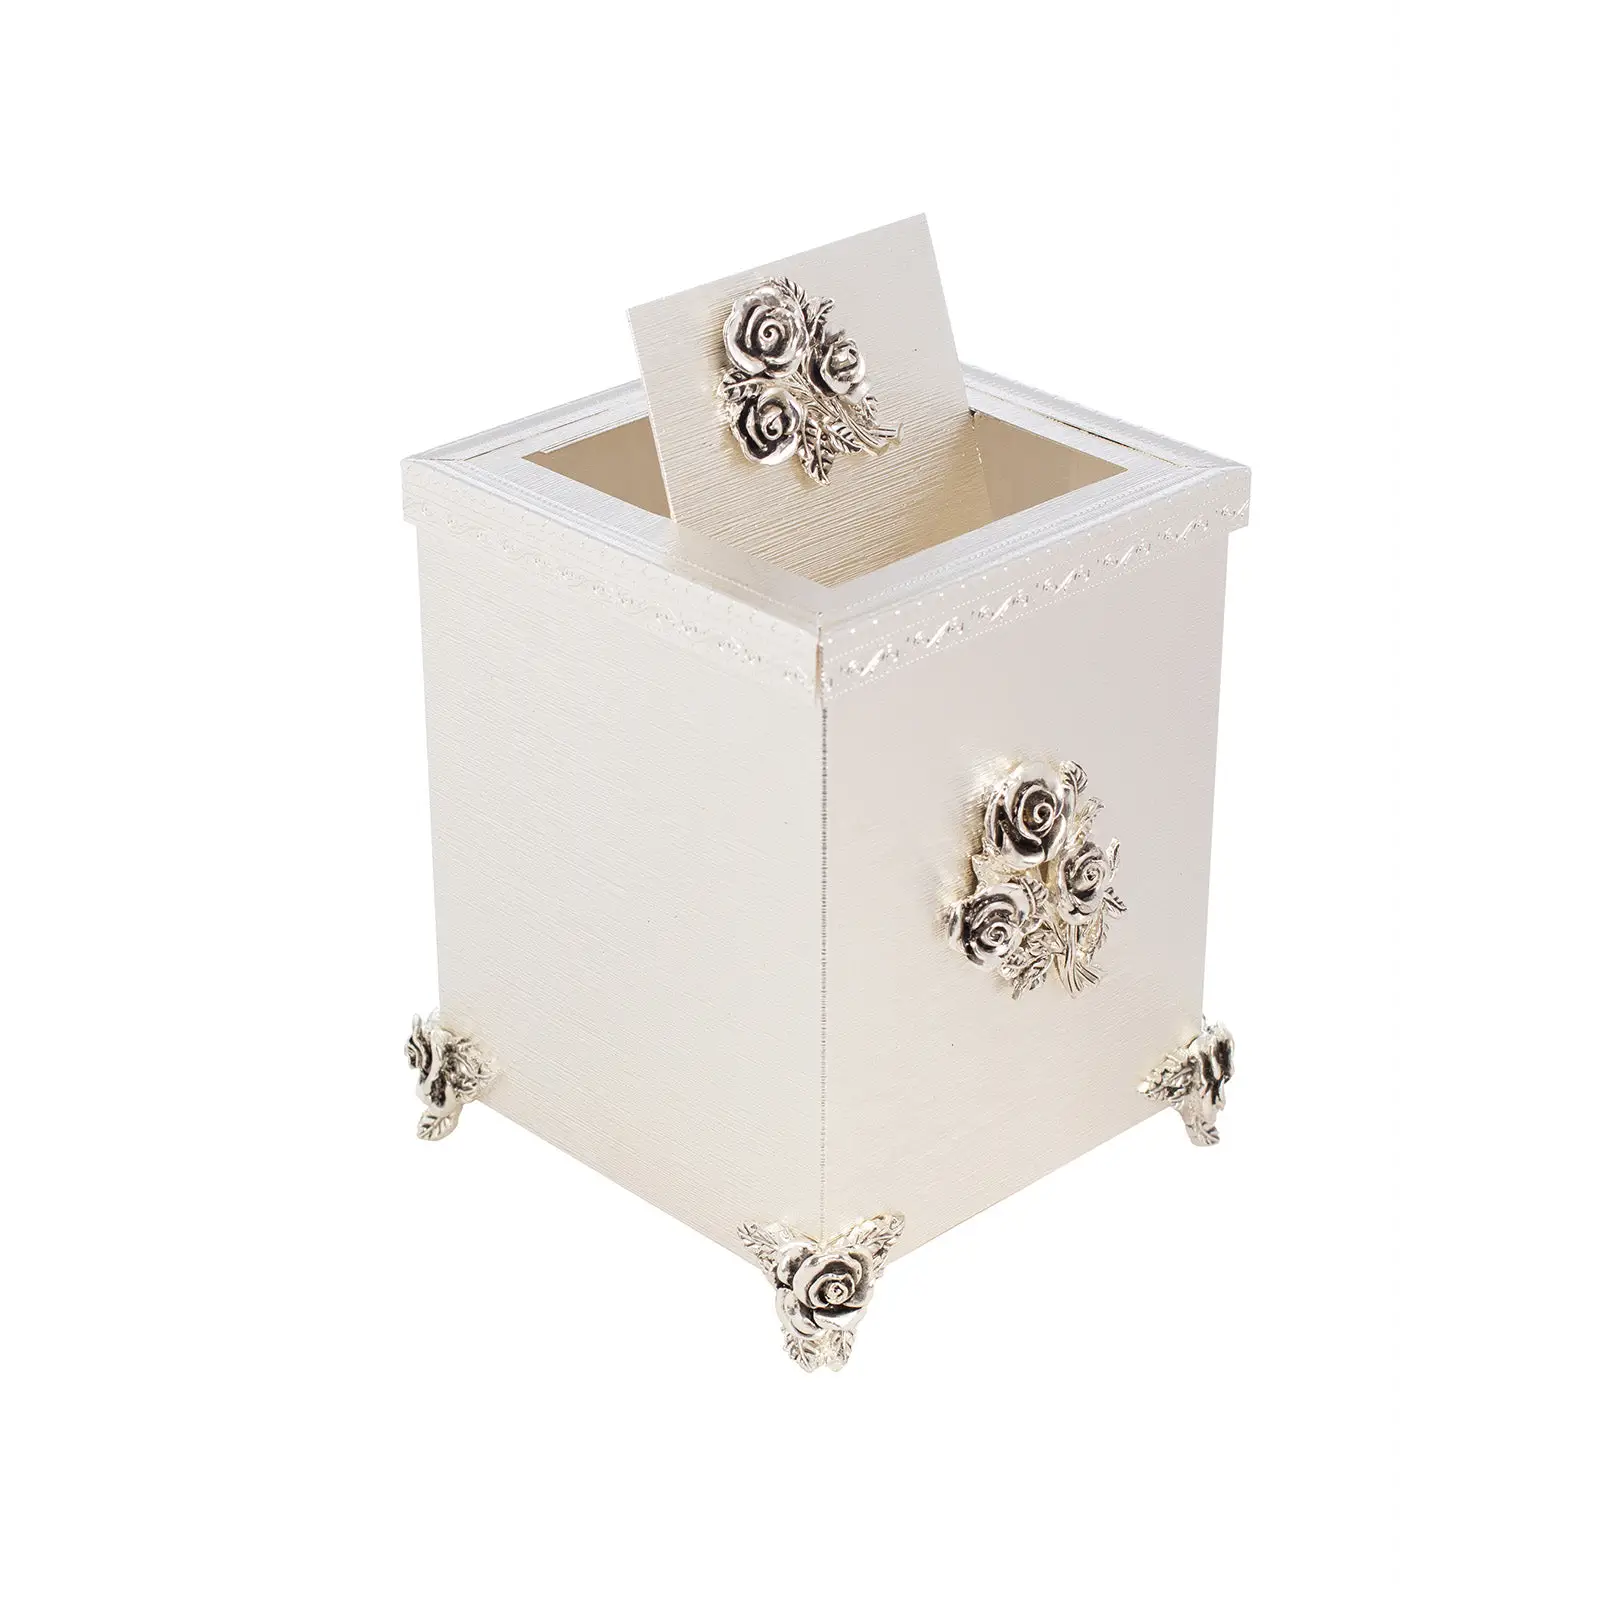 SILVER PLATED DESK WASTE BIN - ROSE COLLECTION